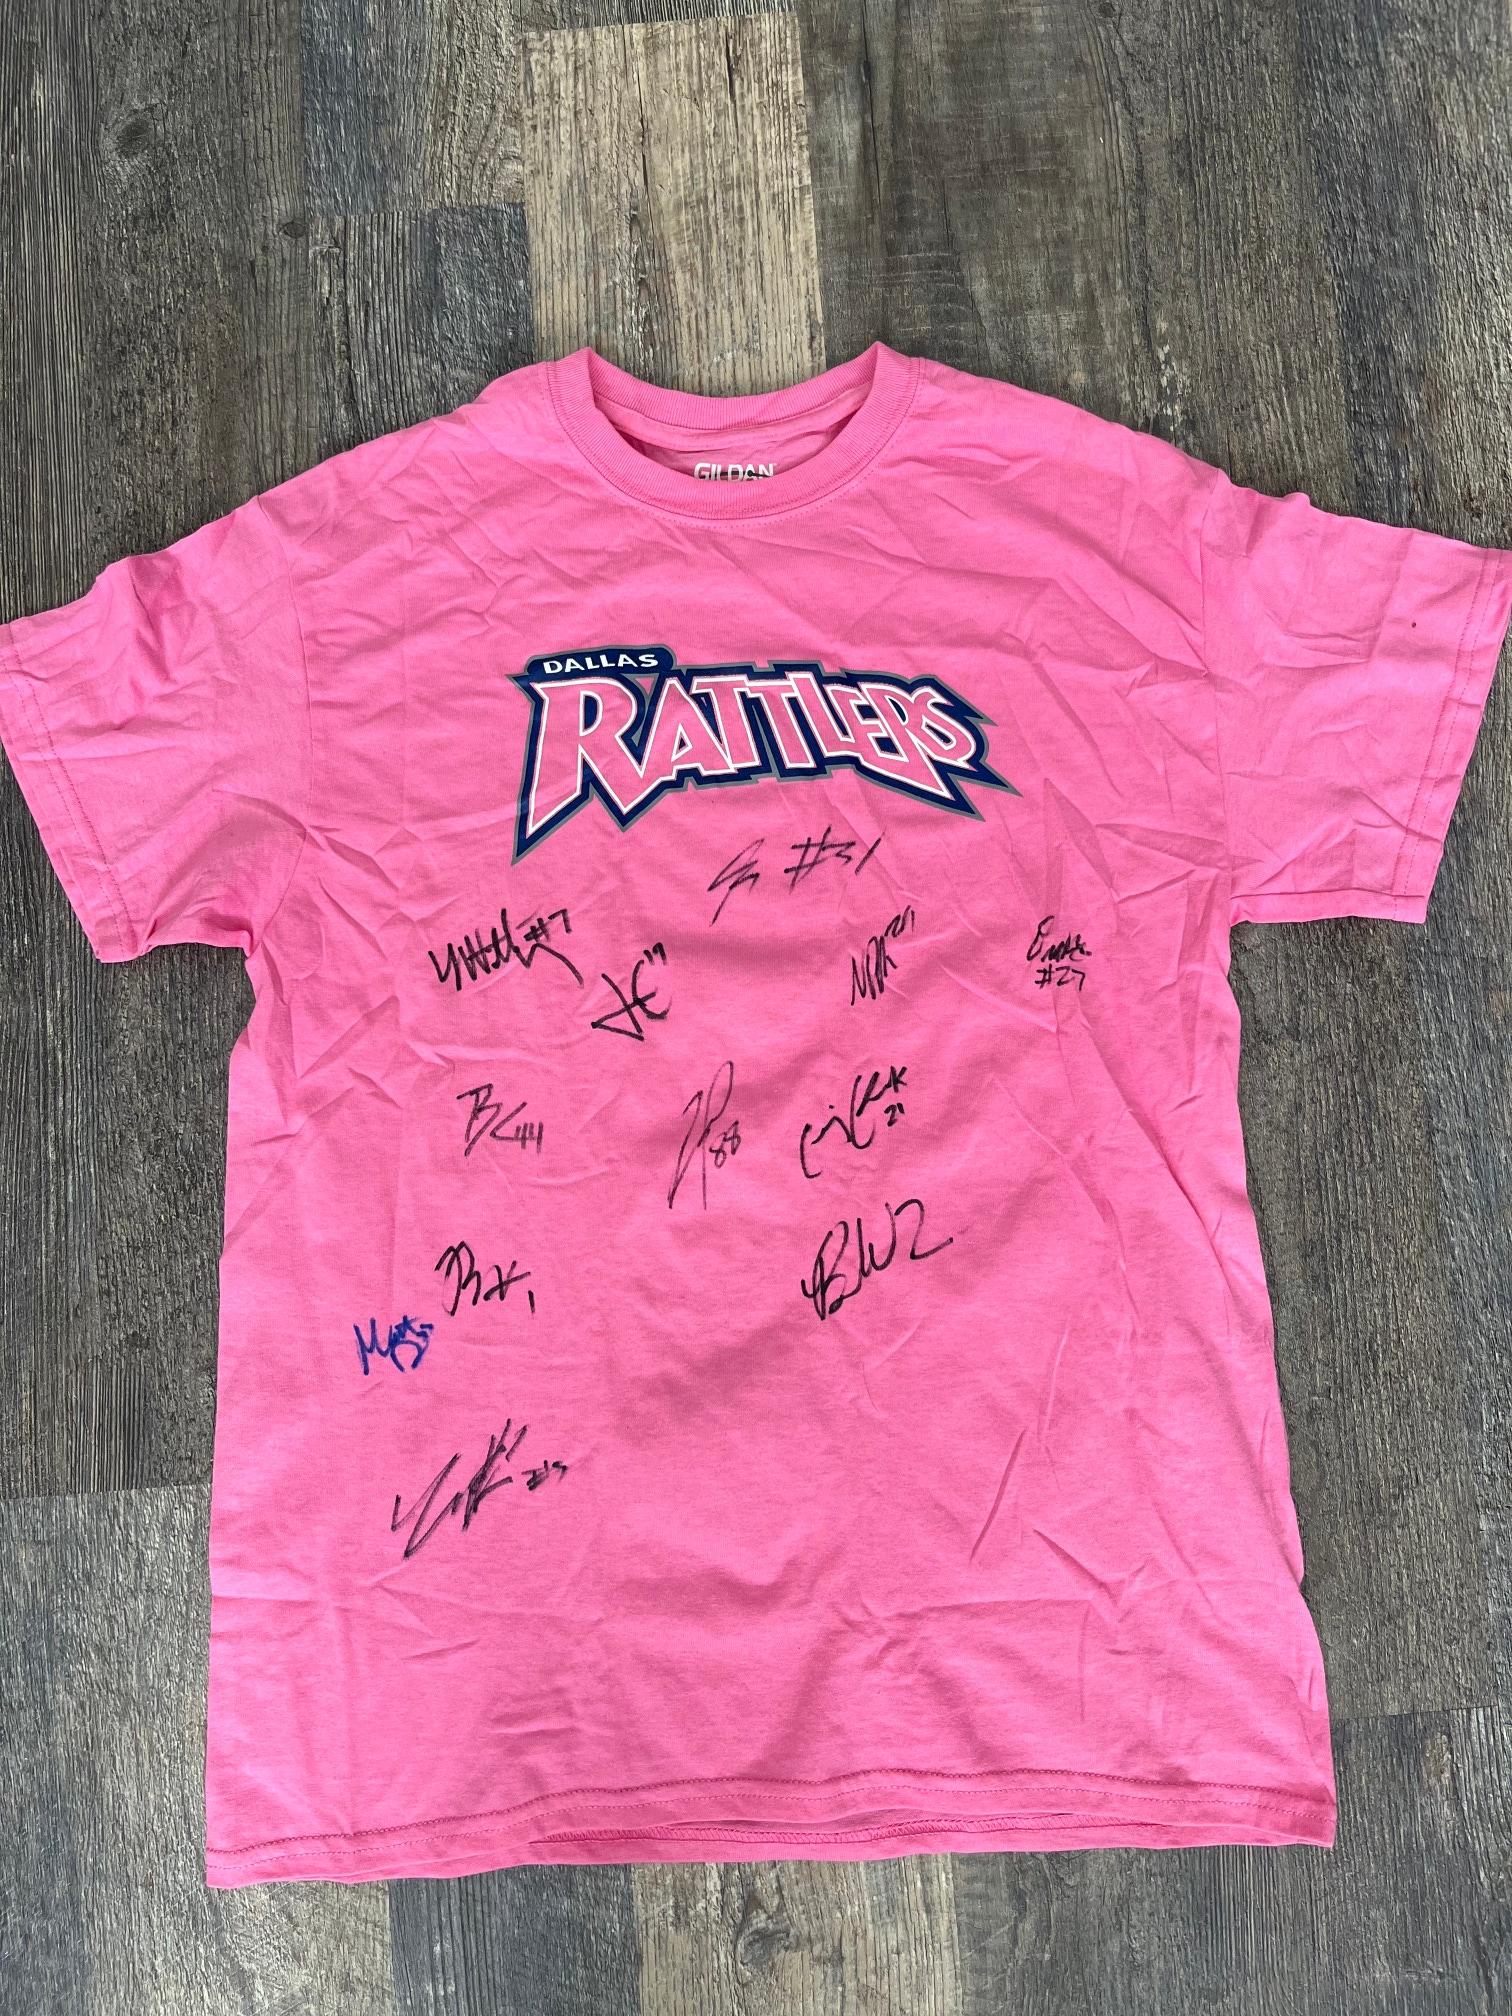 MLL Autographed Shirt (Includes Paul Rabil and many more - Full list in description)